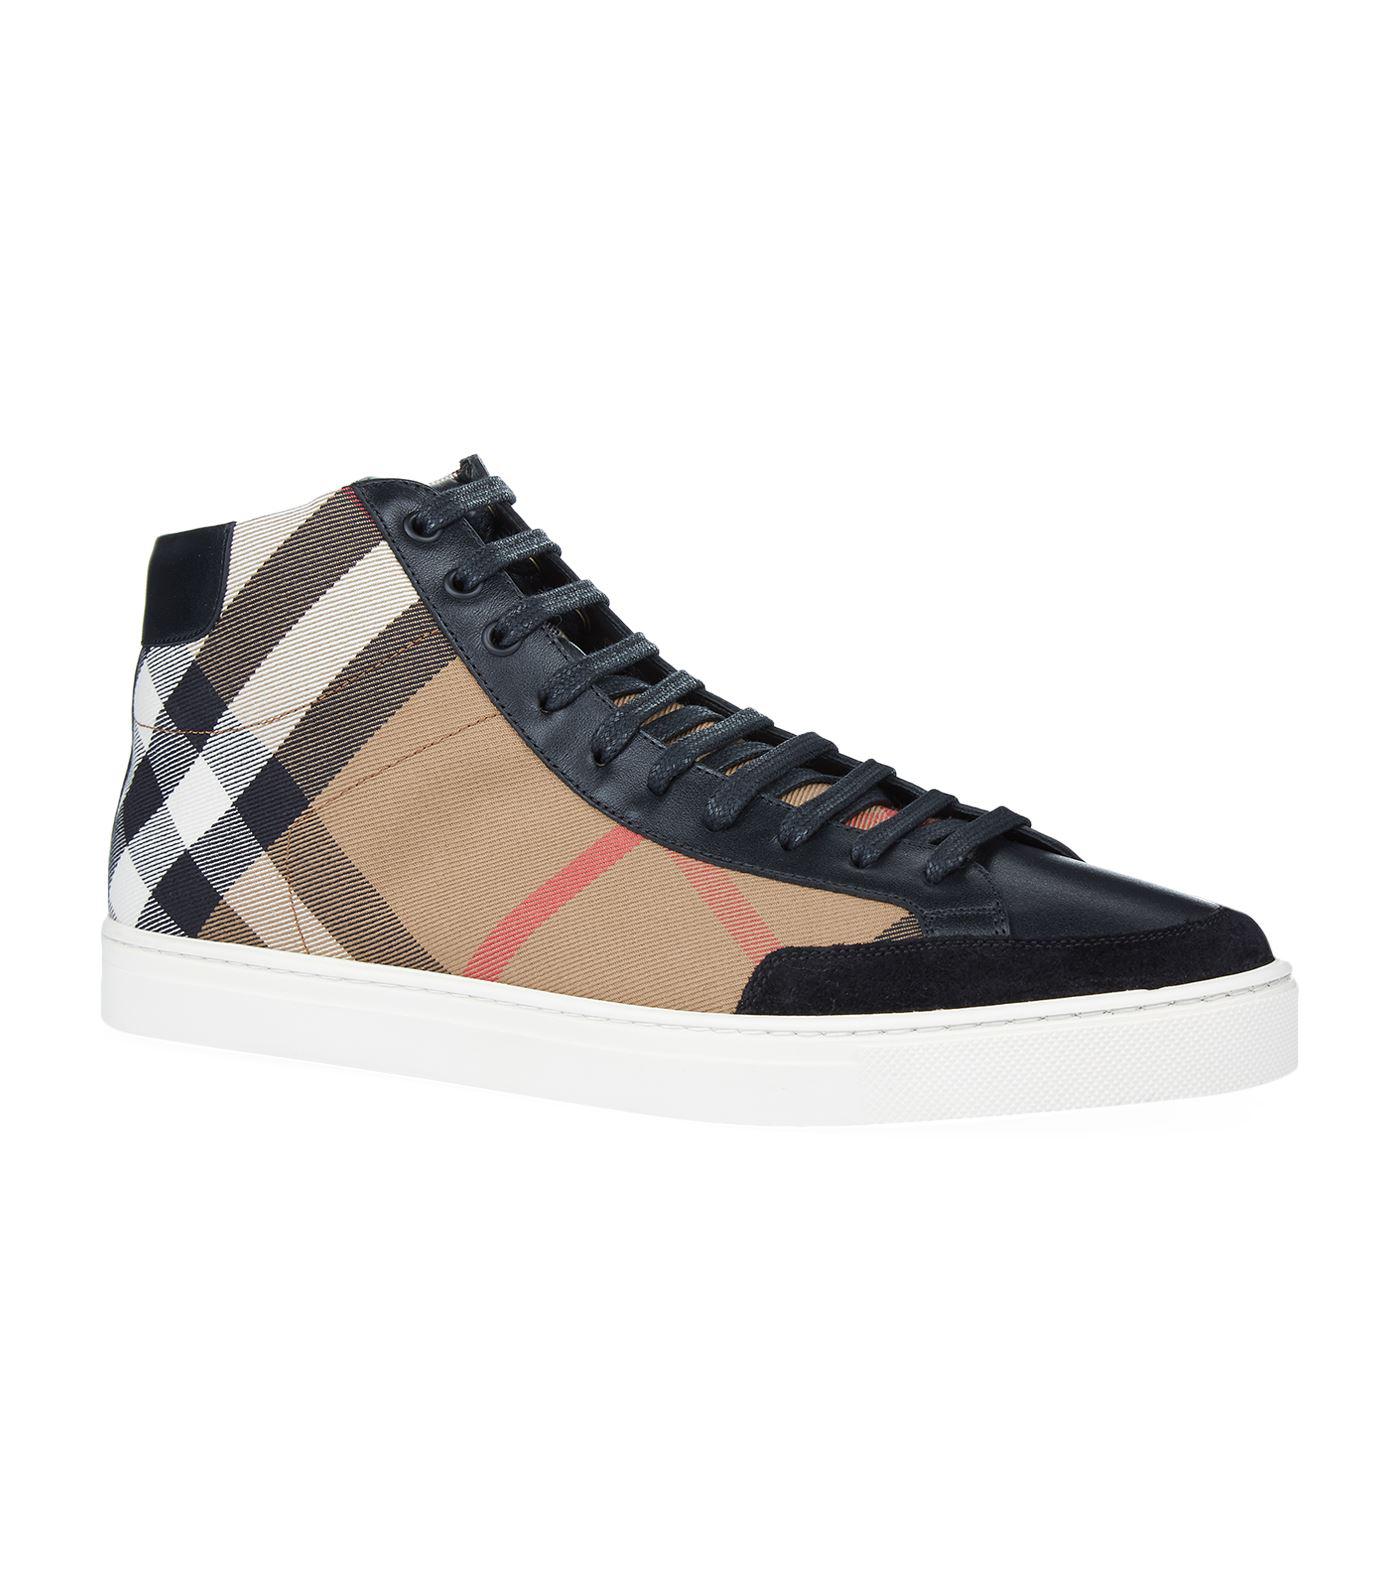 Burberry House Check And Leather High-top Sneakers in Black for Men - Lyst